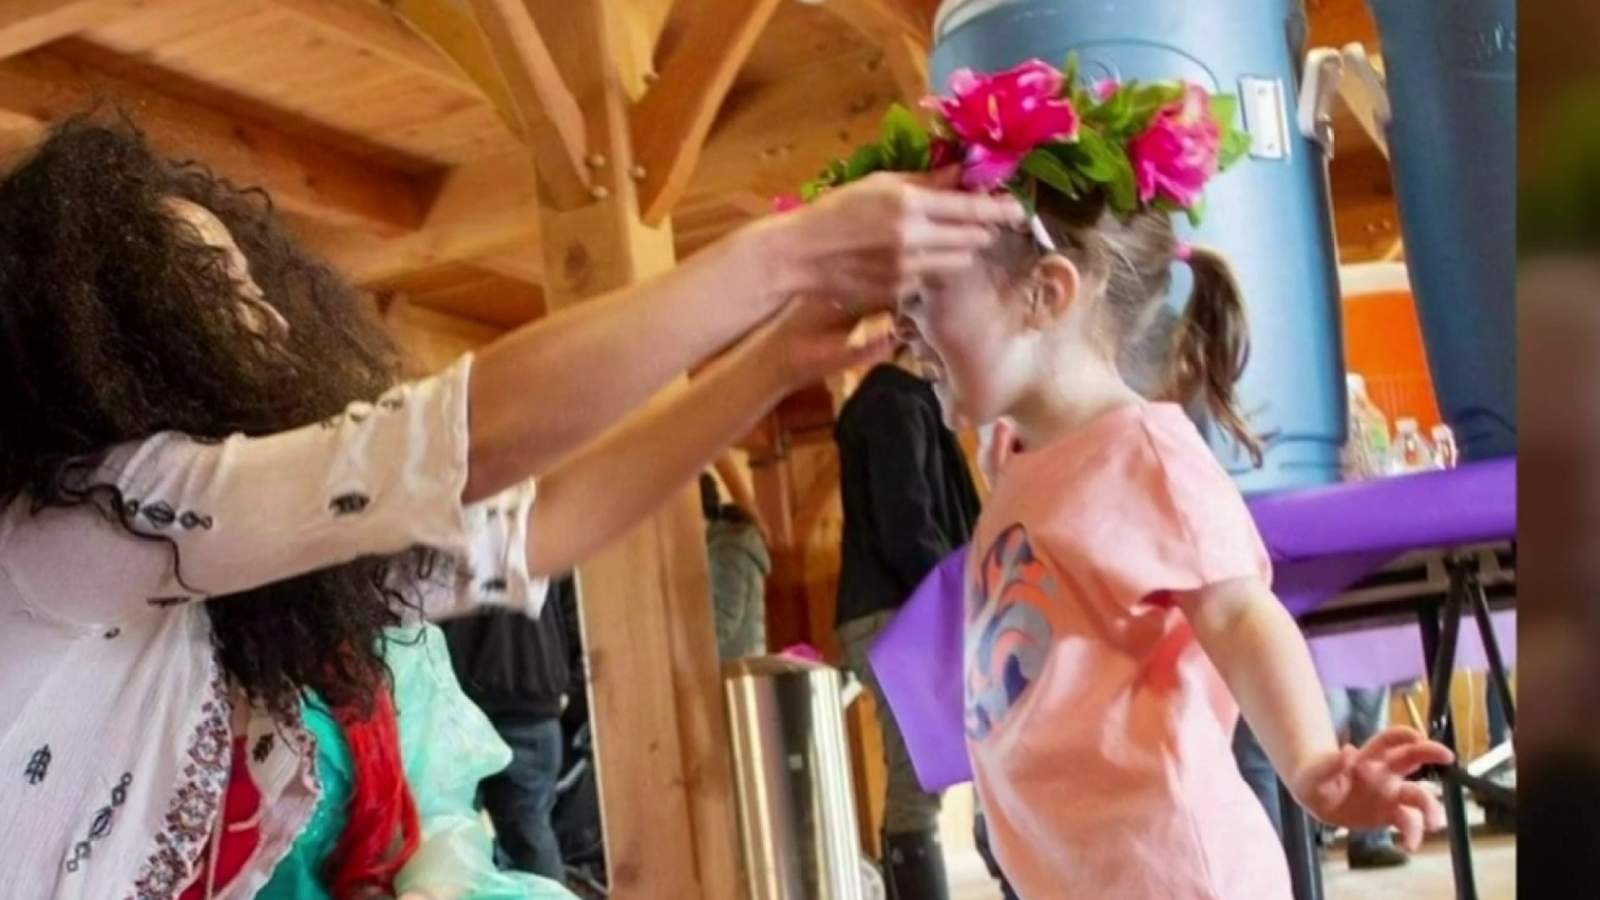 Crowns Against Cancer: Helping put smiles on faces of kids who need it most